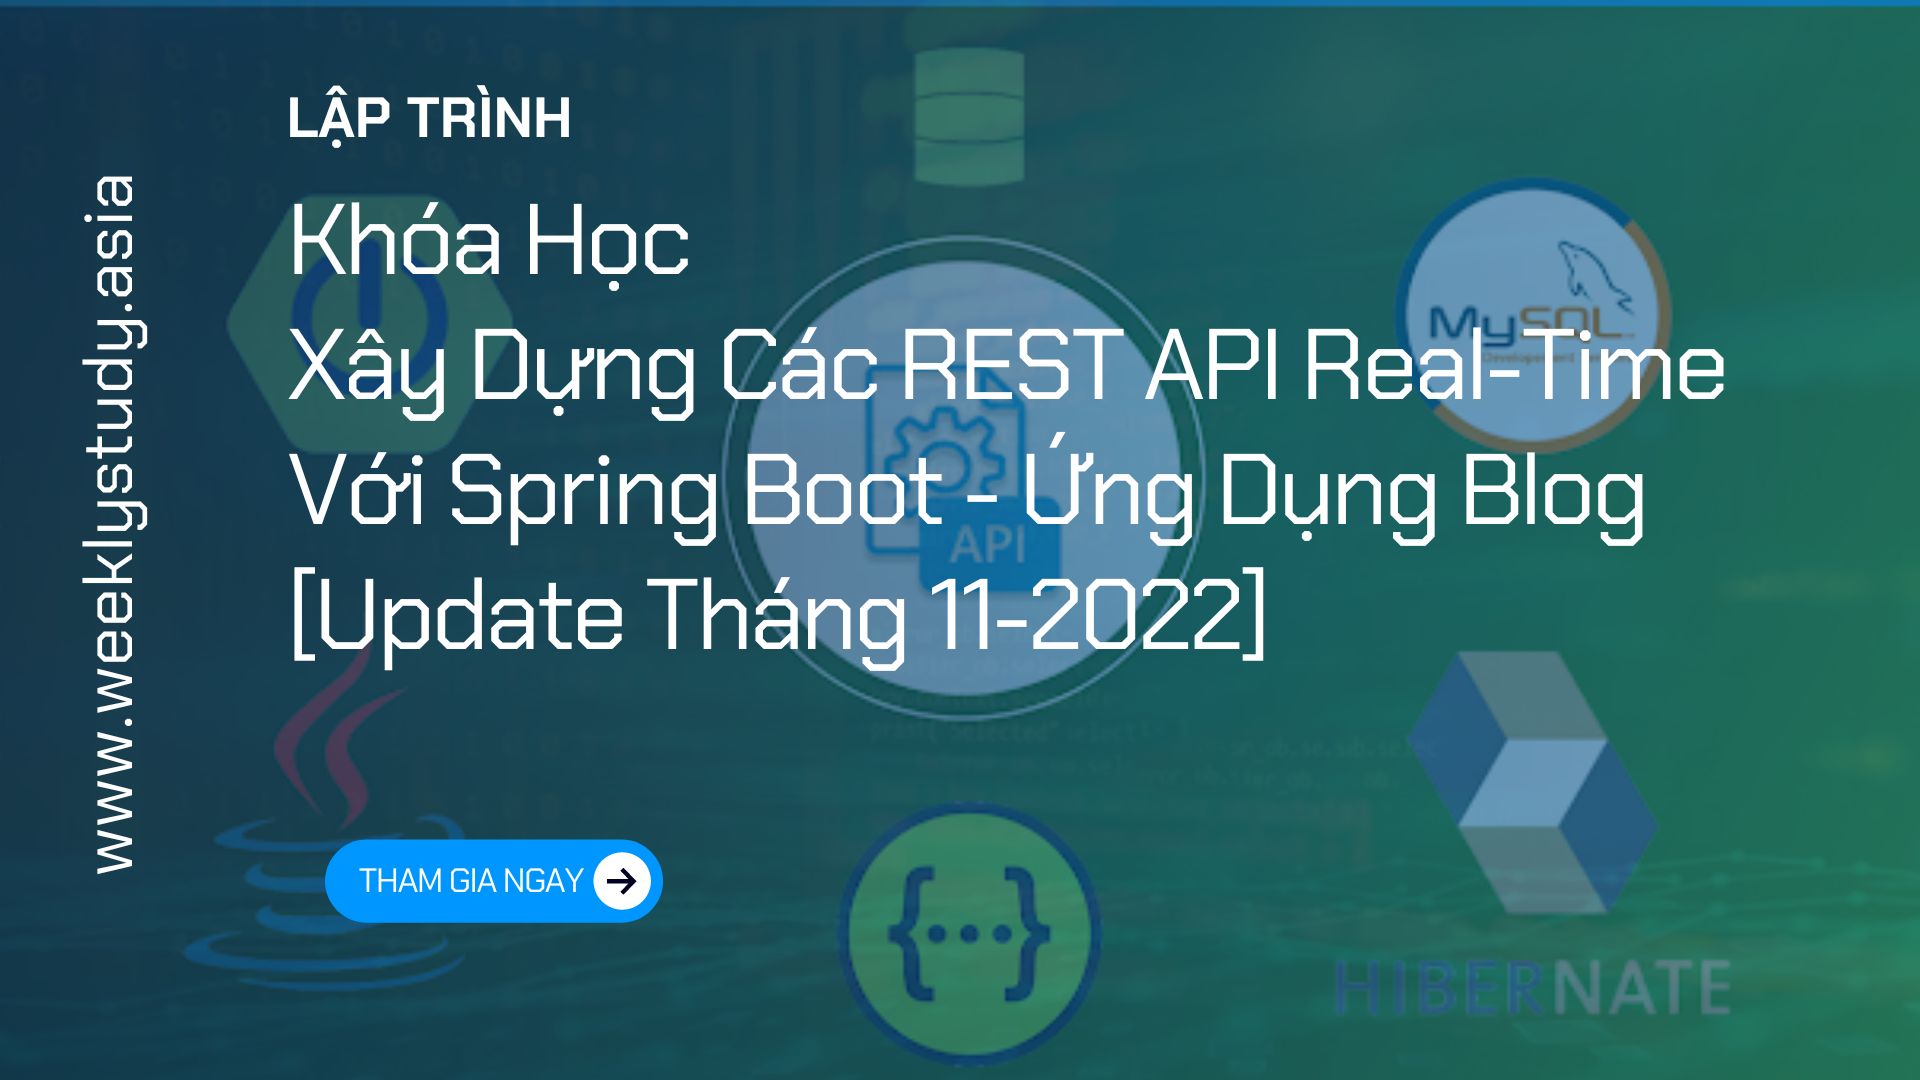 khoa-hoc-xay-dung-cac-rest-api-real-time-voi-spring-boot--ung-dung-blog-ma-7626a